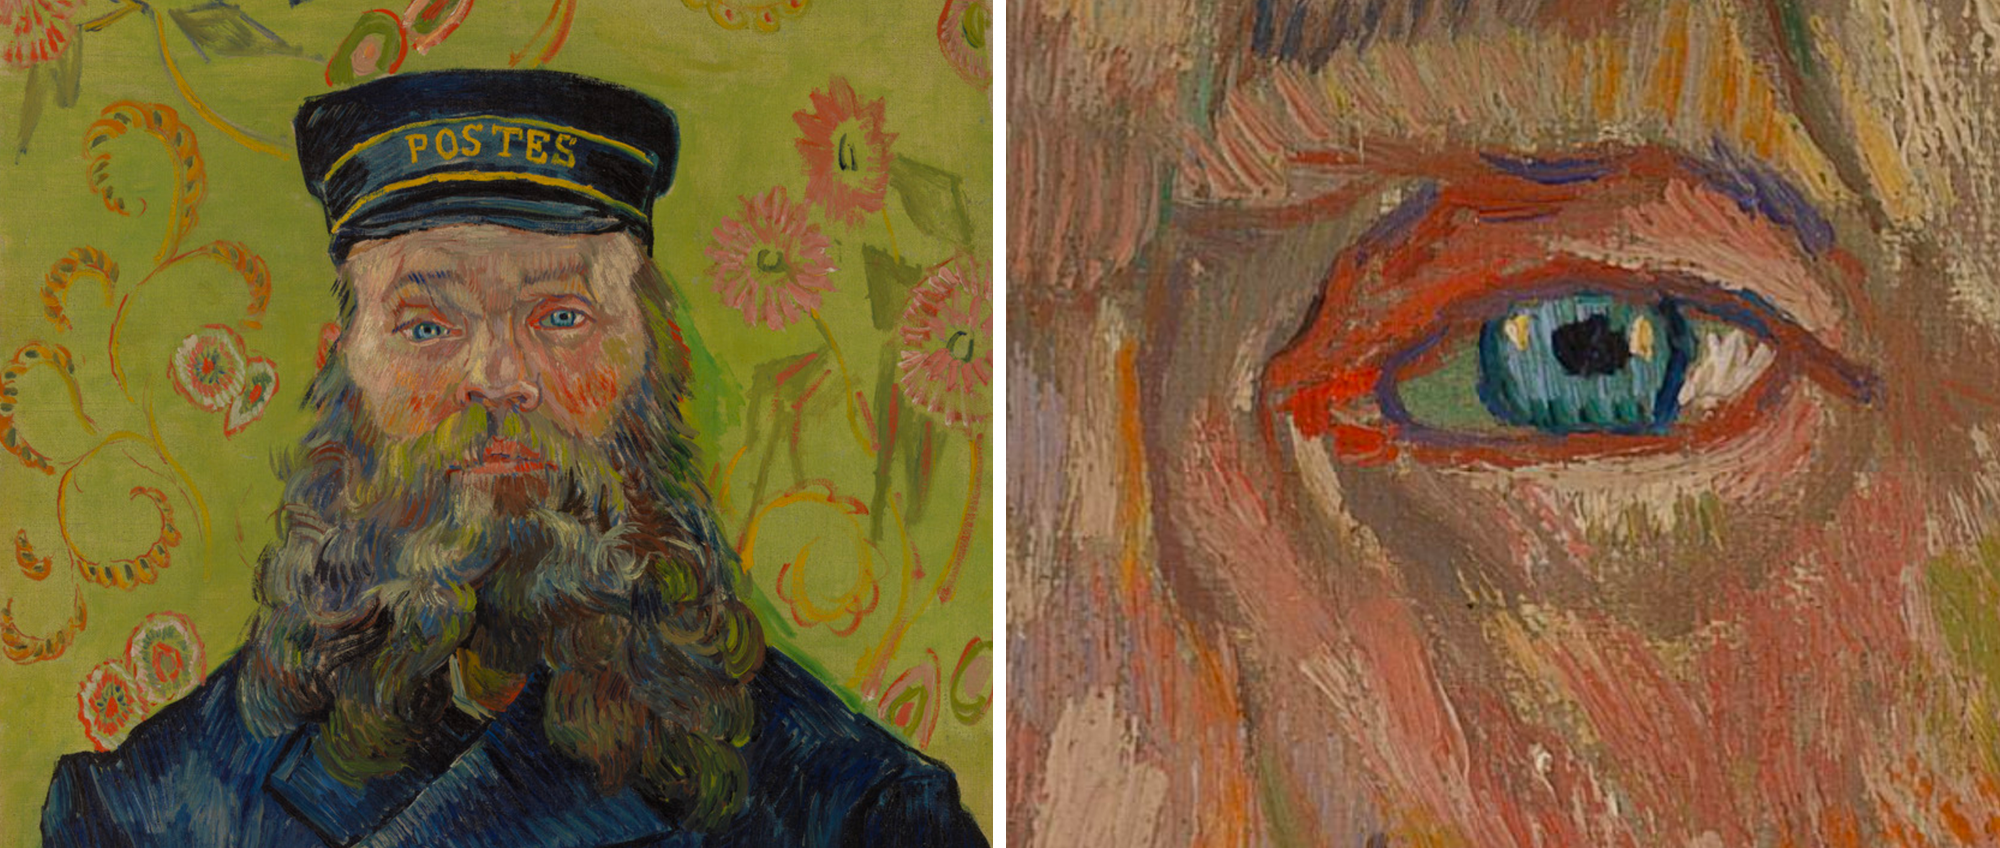 Vincent Van Gogh's The Postman, full-scale and zoomed-in.